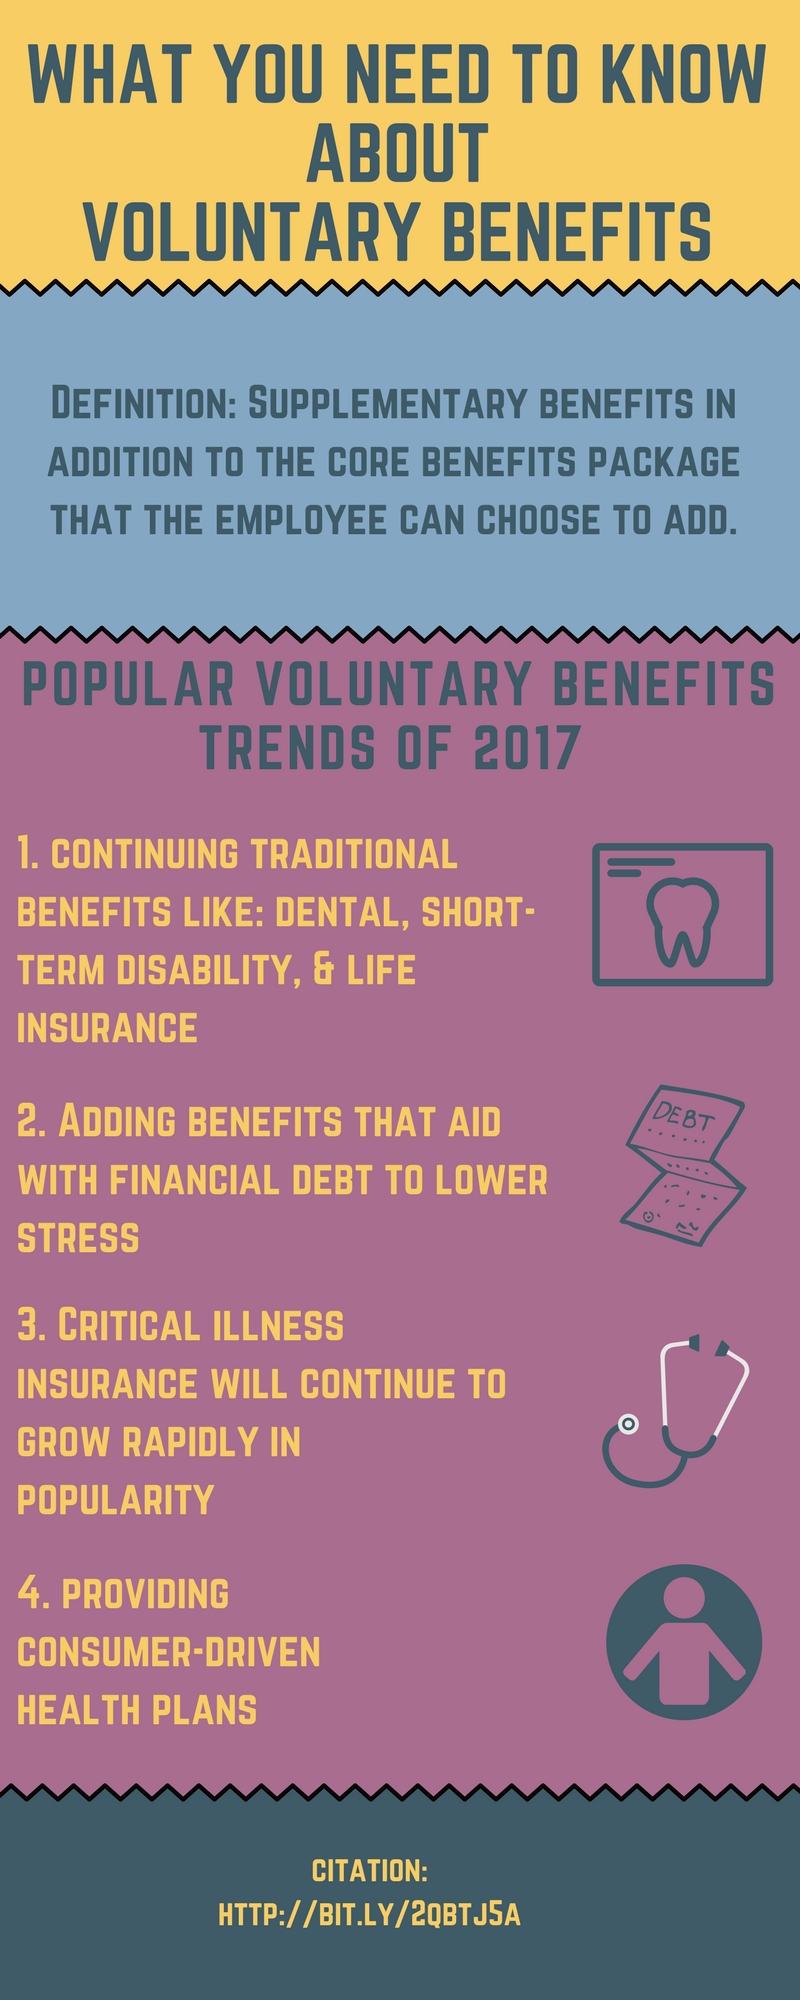 What You Need To Know About Voluntary Benefits - Default Landing Page - Strategic Services Group - Employee-Benefit-Trends-of-2017-FINAL